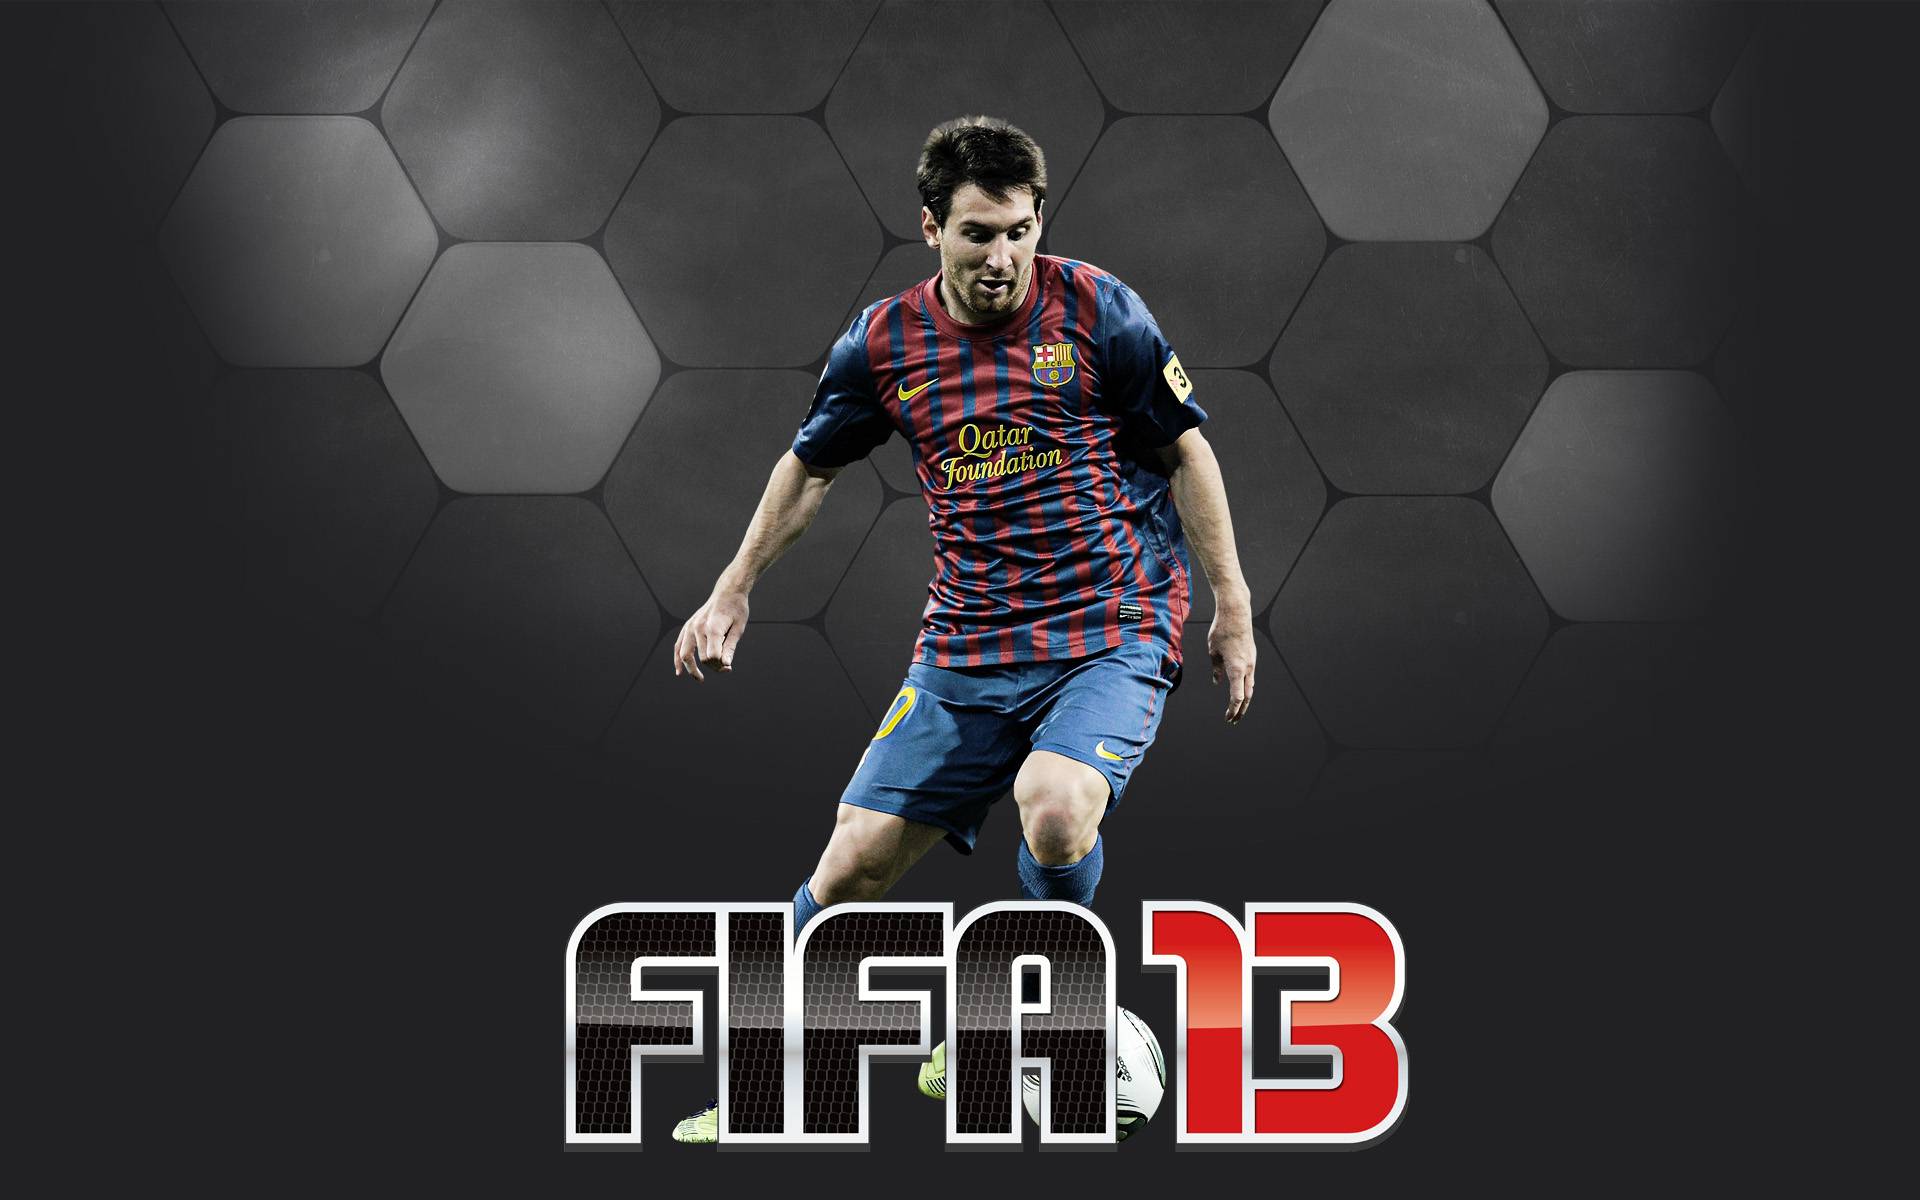 Fifa Wallpaper In HD Gamingbolt Video Game News Res